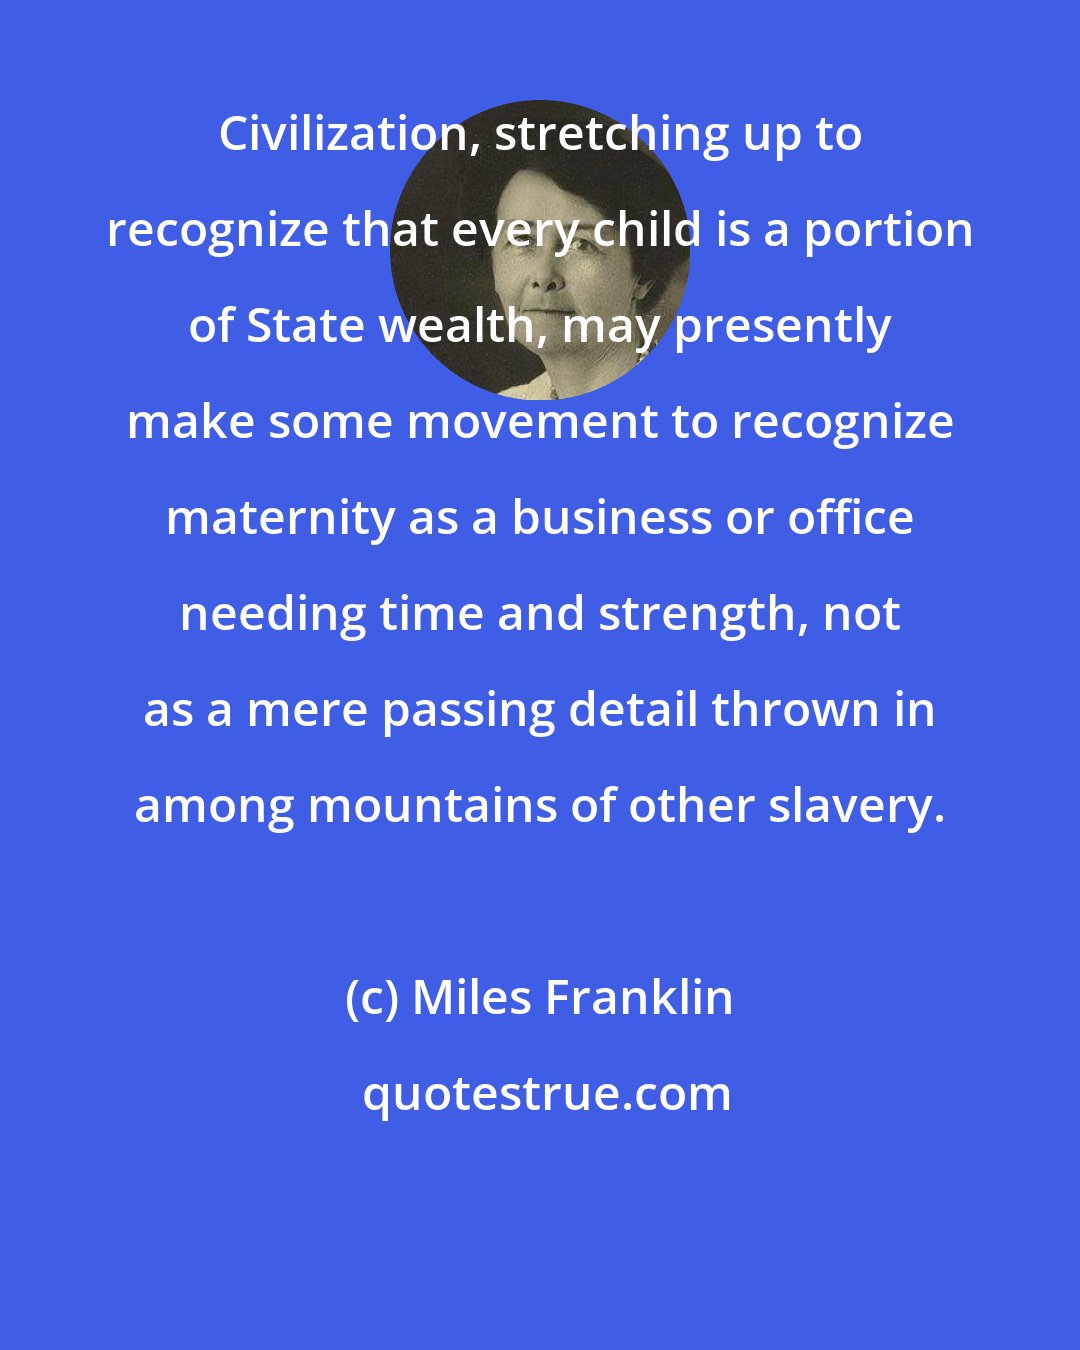 Miles Franklin: Civilization, stretching up to recognize that every child is a portion of State wealth, may presently make some movement to recognize maternity as a business or office needing time and strength, not as a mere passing detail thrown in among mountains of other slavery.